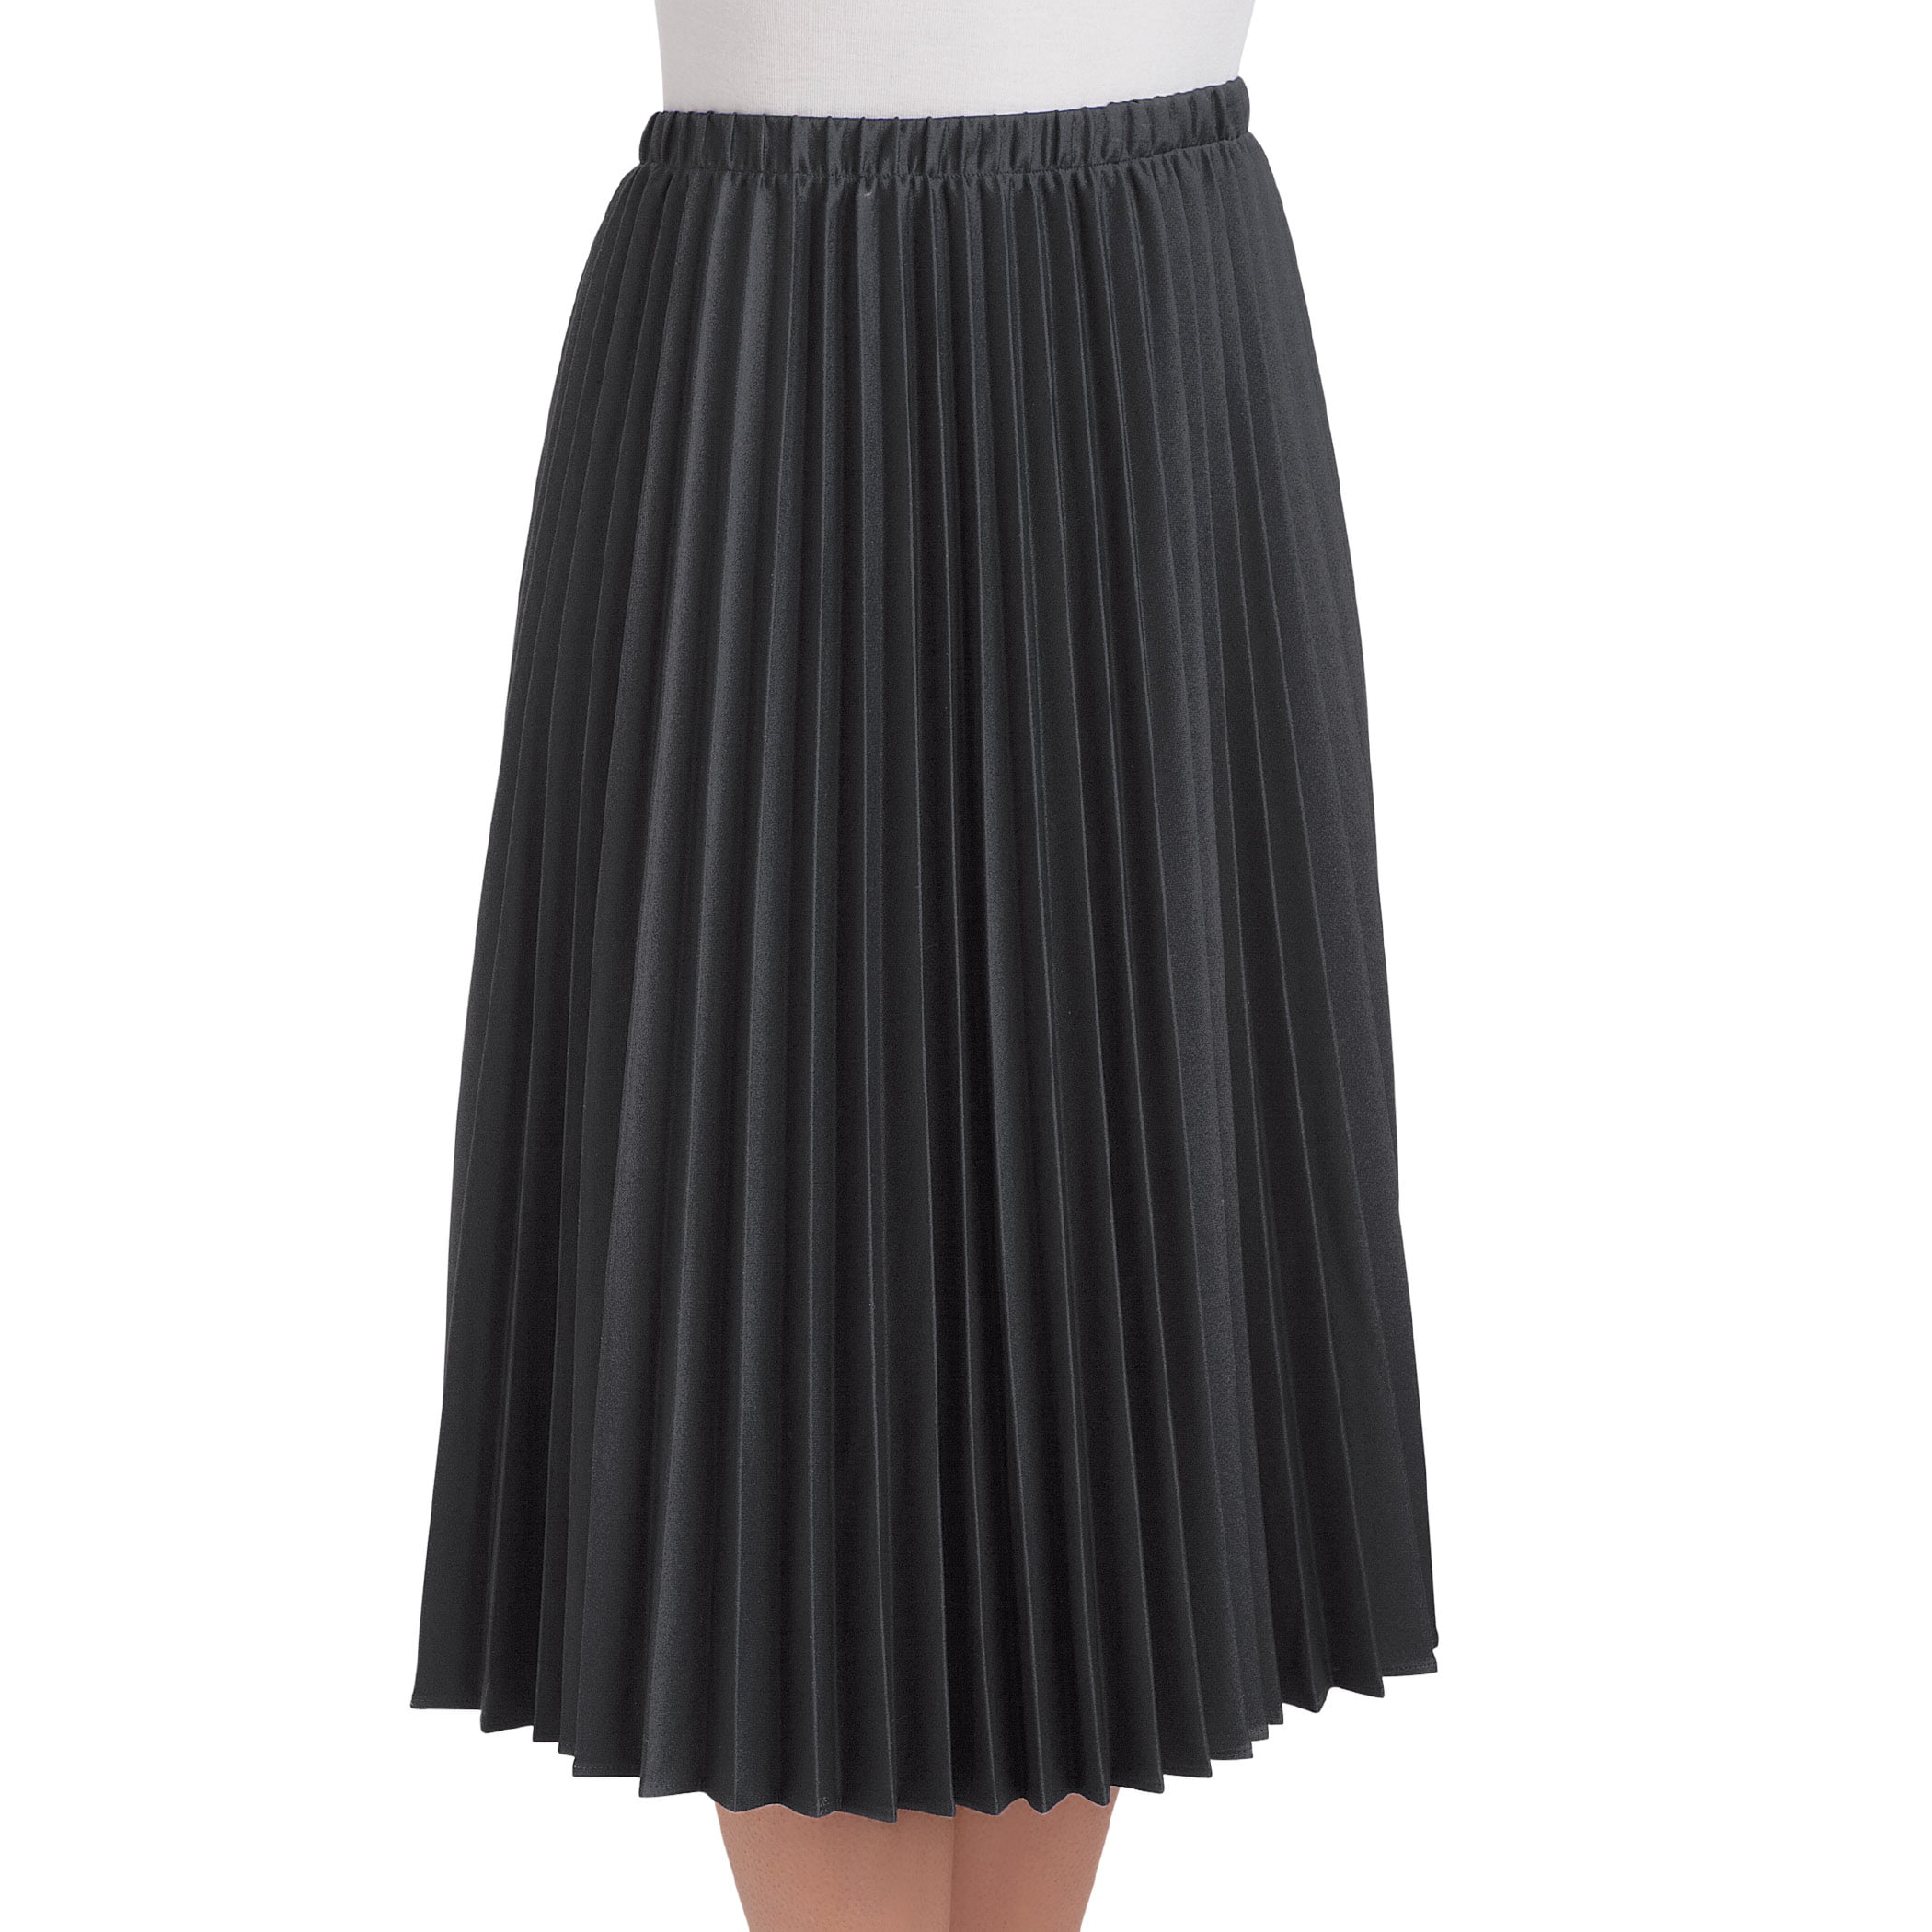 Collections Etc Women's Classic Pleated Mid-Length Jersey Knit Midi Skirt  with Comfortable Elastic Waistband, Black, Medium - Made in The USA